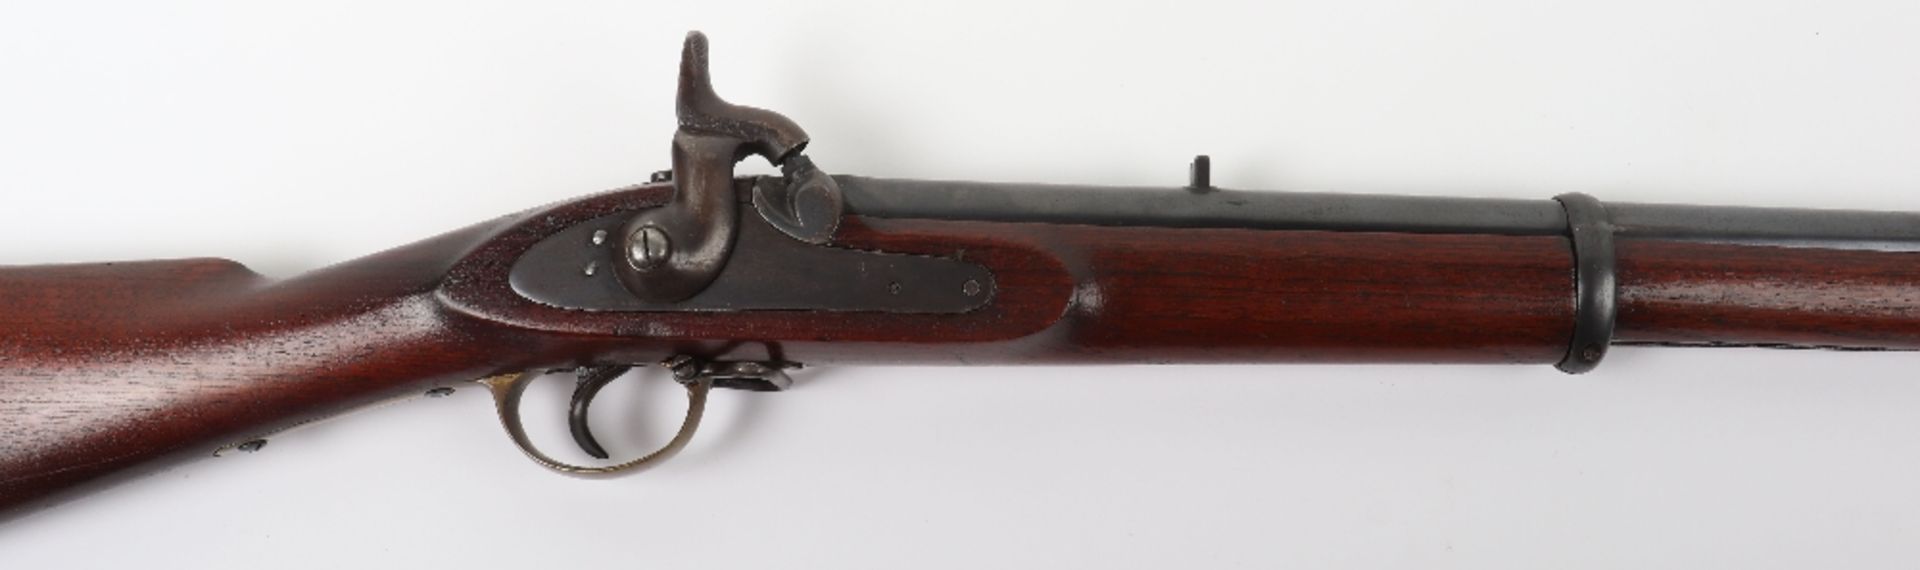 14 Bore Indian Military Style Percussion Musket - Image 3 of 9